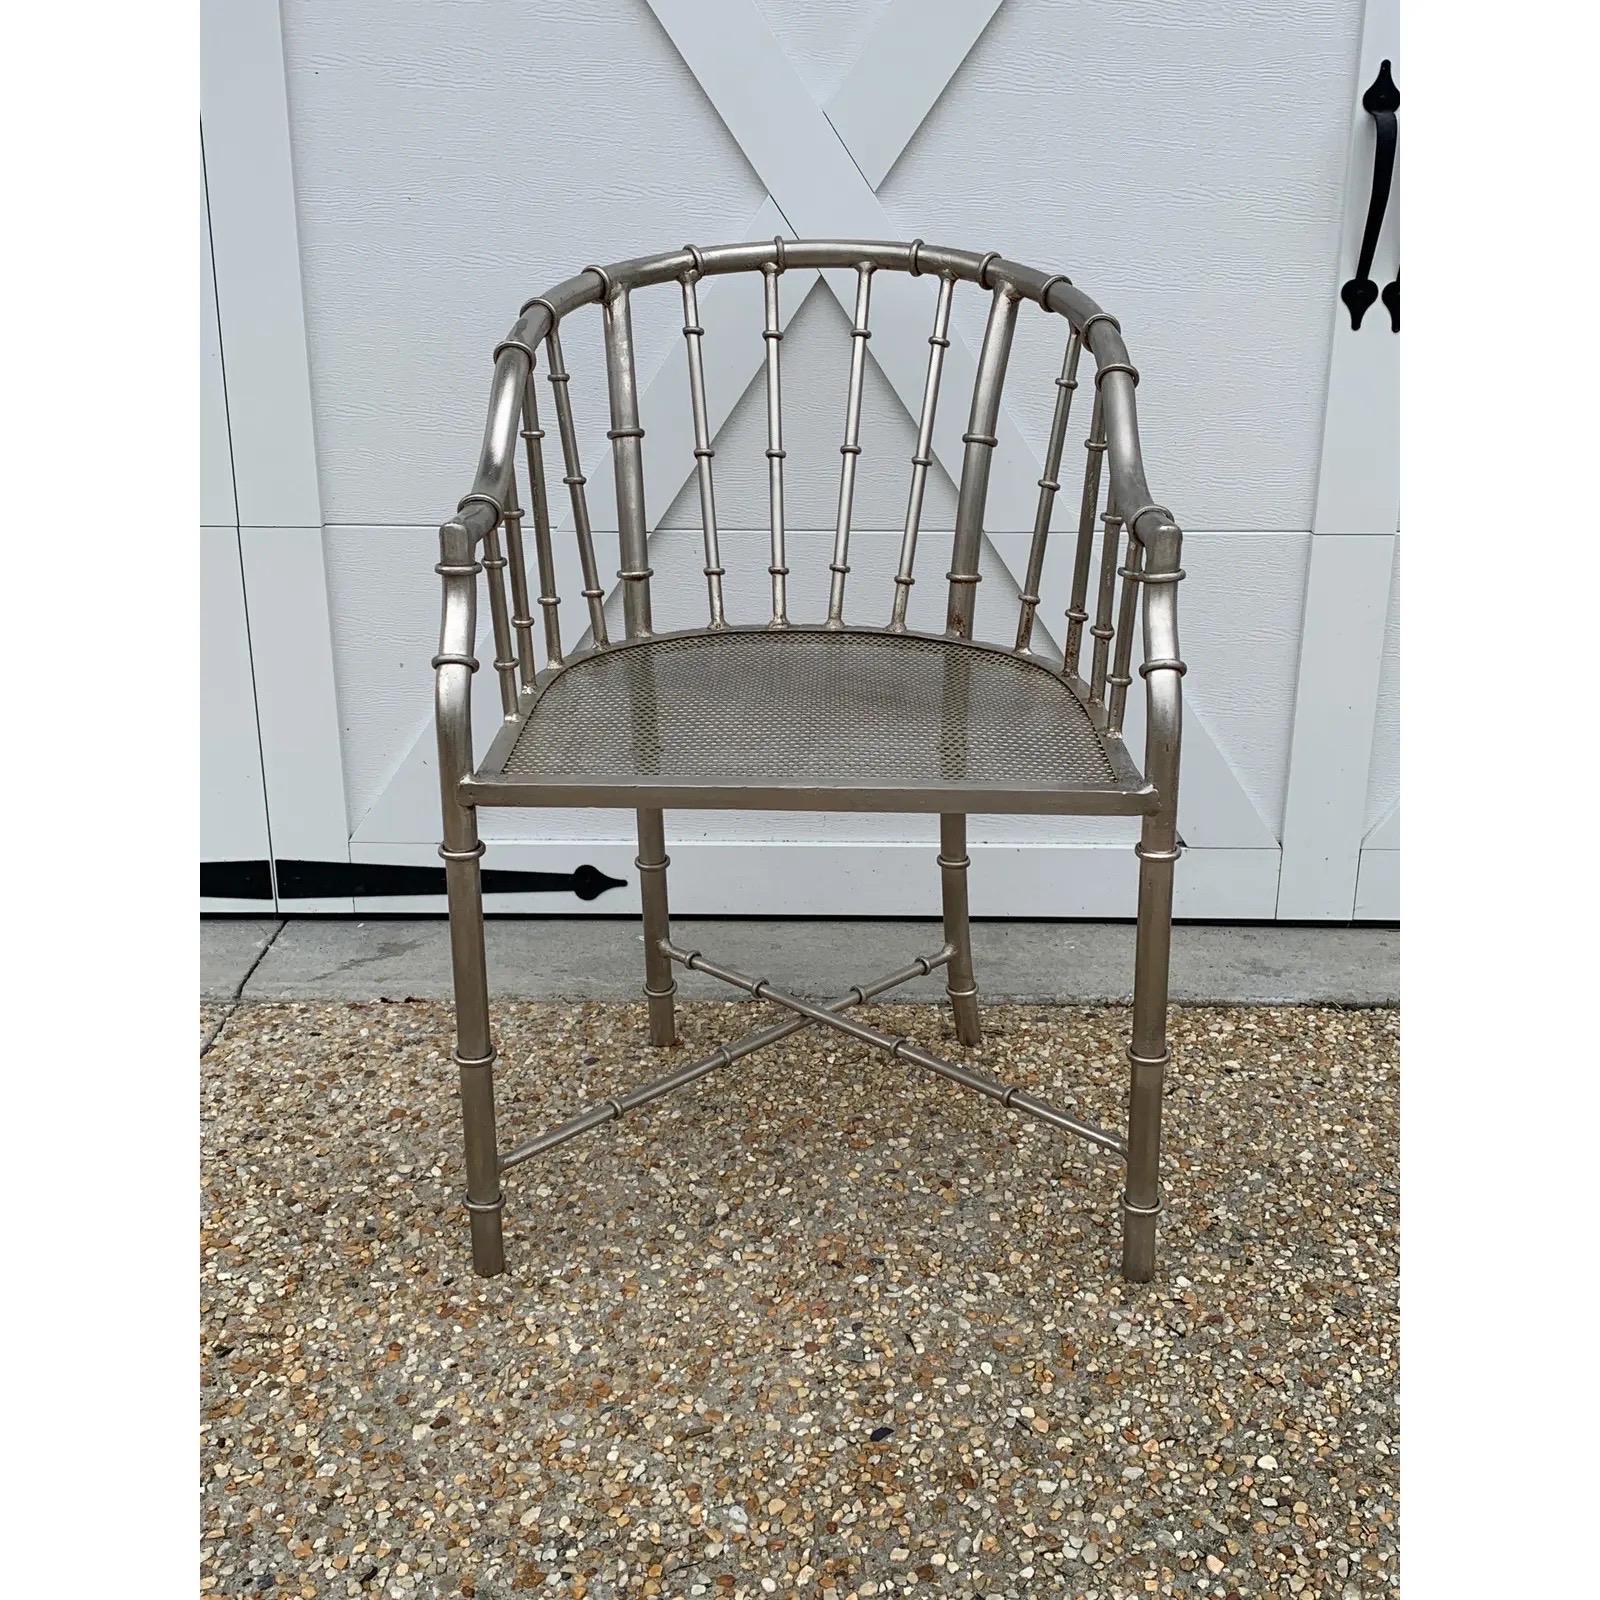 Listed is a stunning, pair of 1960s French steel faux-bamboo armchairs, attributed to Jacques Adnet. The pair are of incredible quality and weight. We suggest the pair be professionally painted or powder-coated for long-term outdoor use. 17in seat